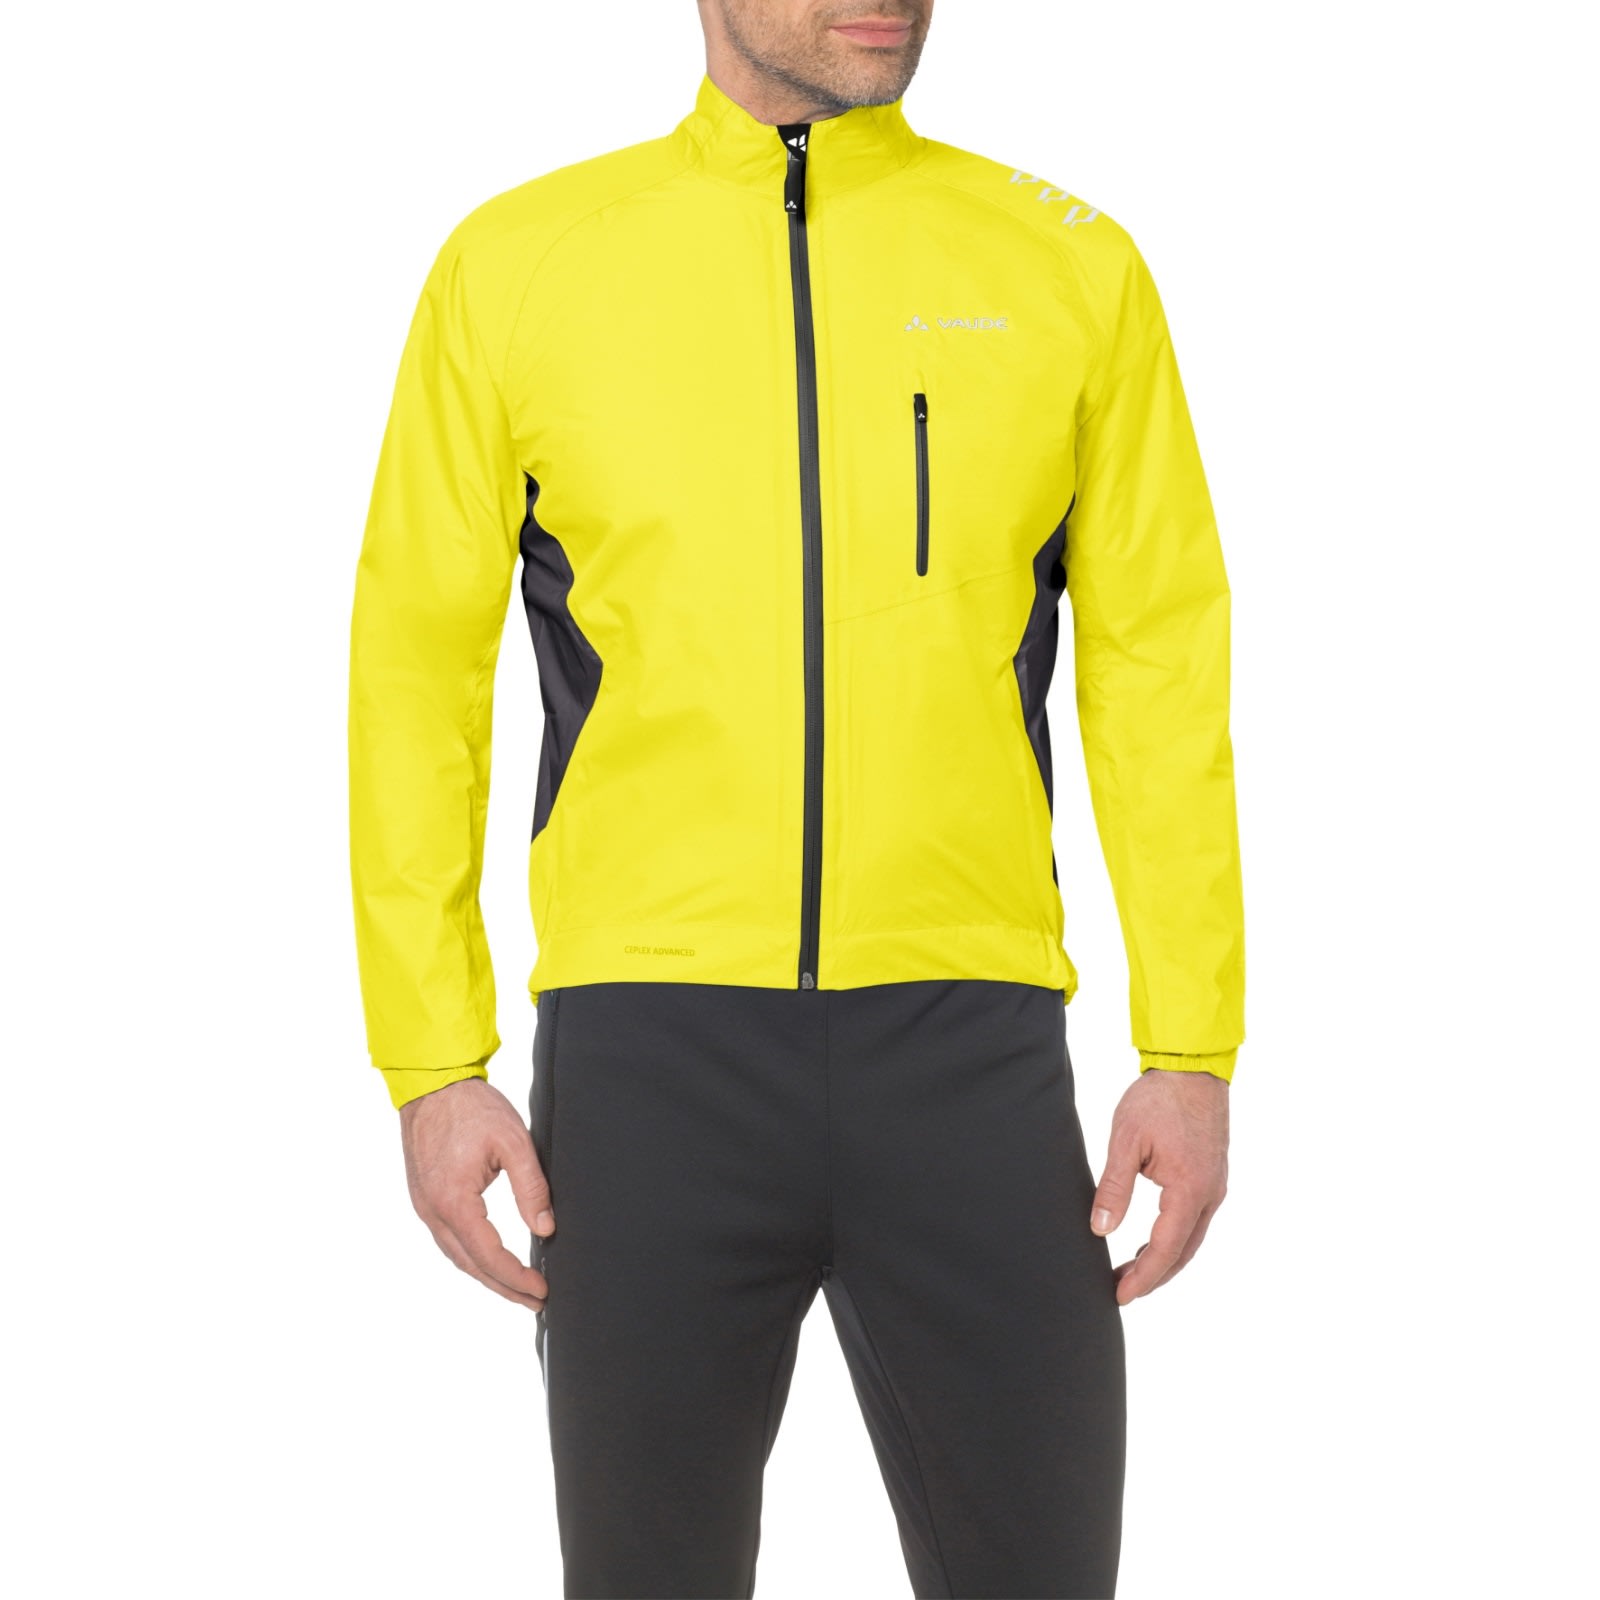 Experiment Arne huisvrouw Buy VAUDE Men's Spray Jacket IV from Outnorth